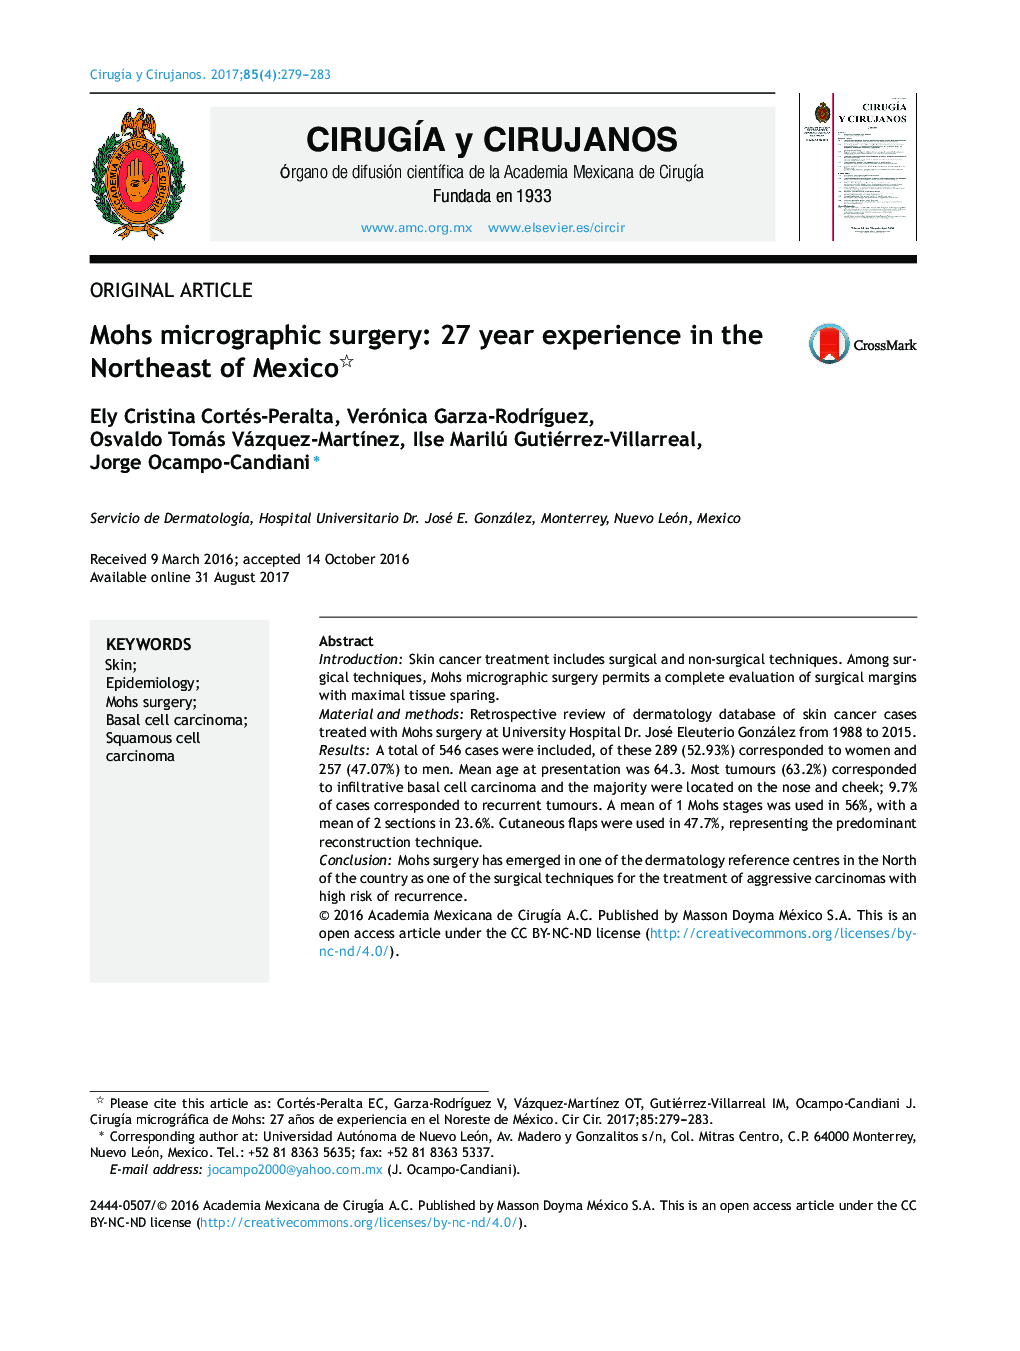 Mohs micrographic surgery: 27 year experience in the Northeast of Mexico